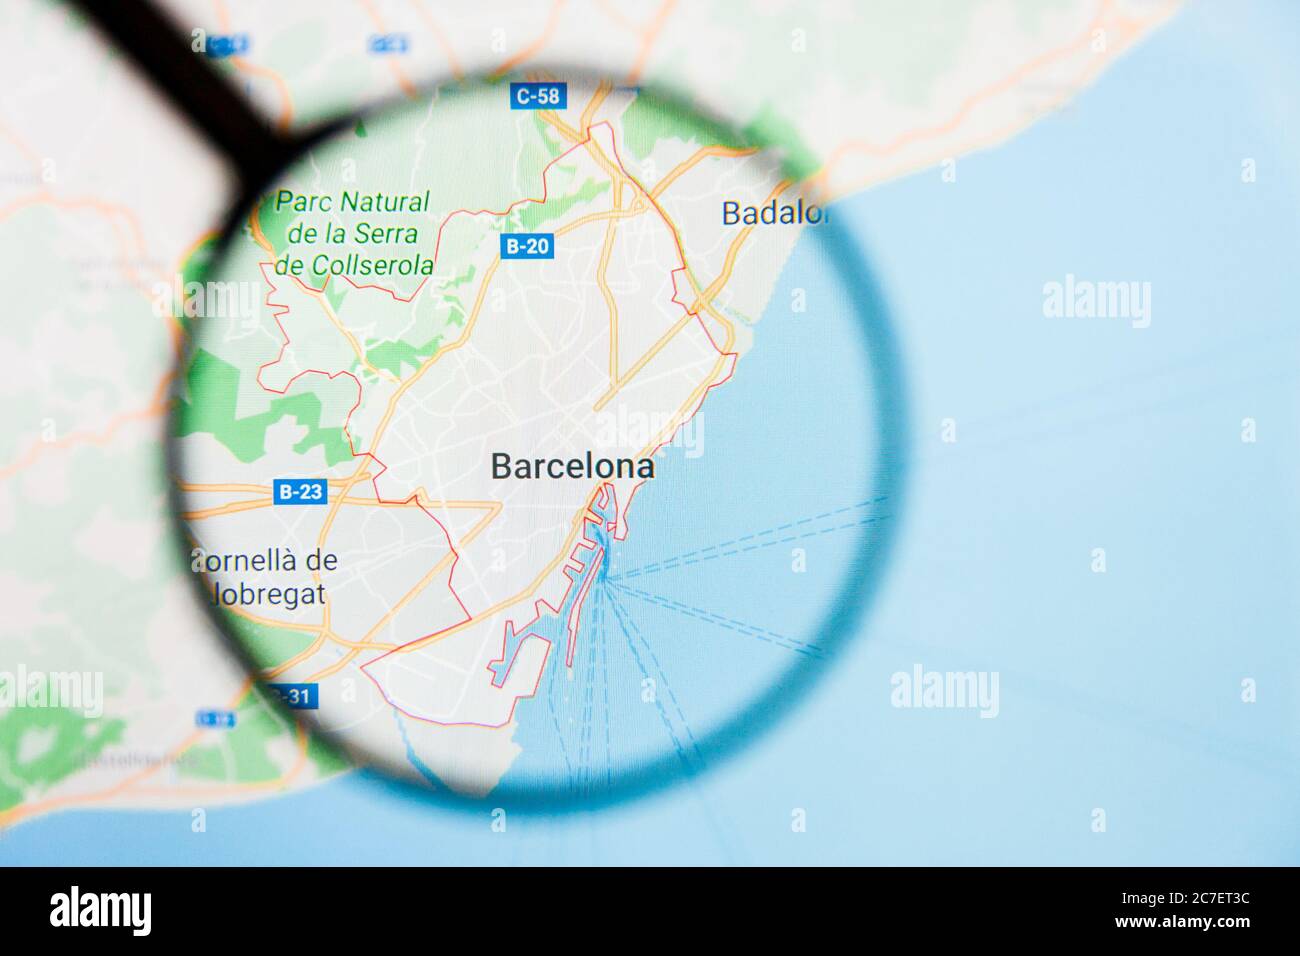 Barcelona city visualization illustrative concept on display screen through magnifying glass Stock Photo